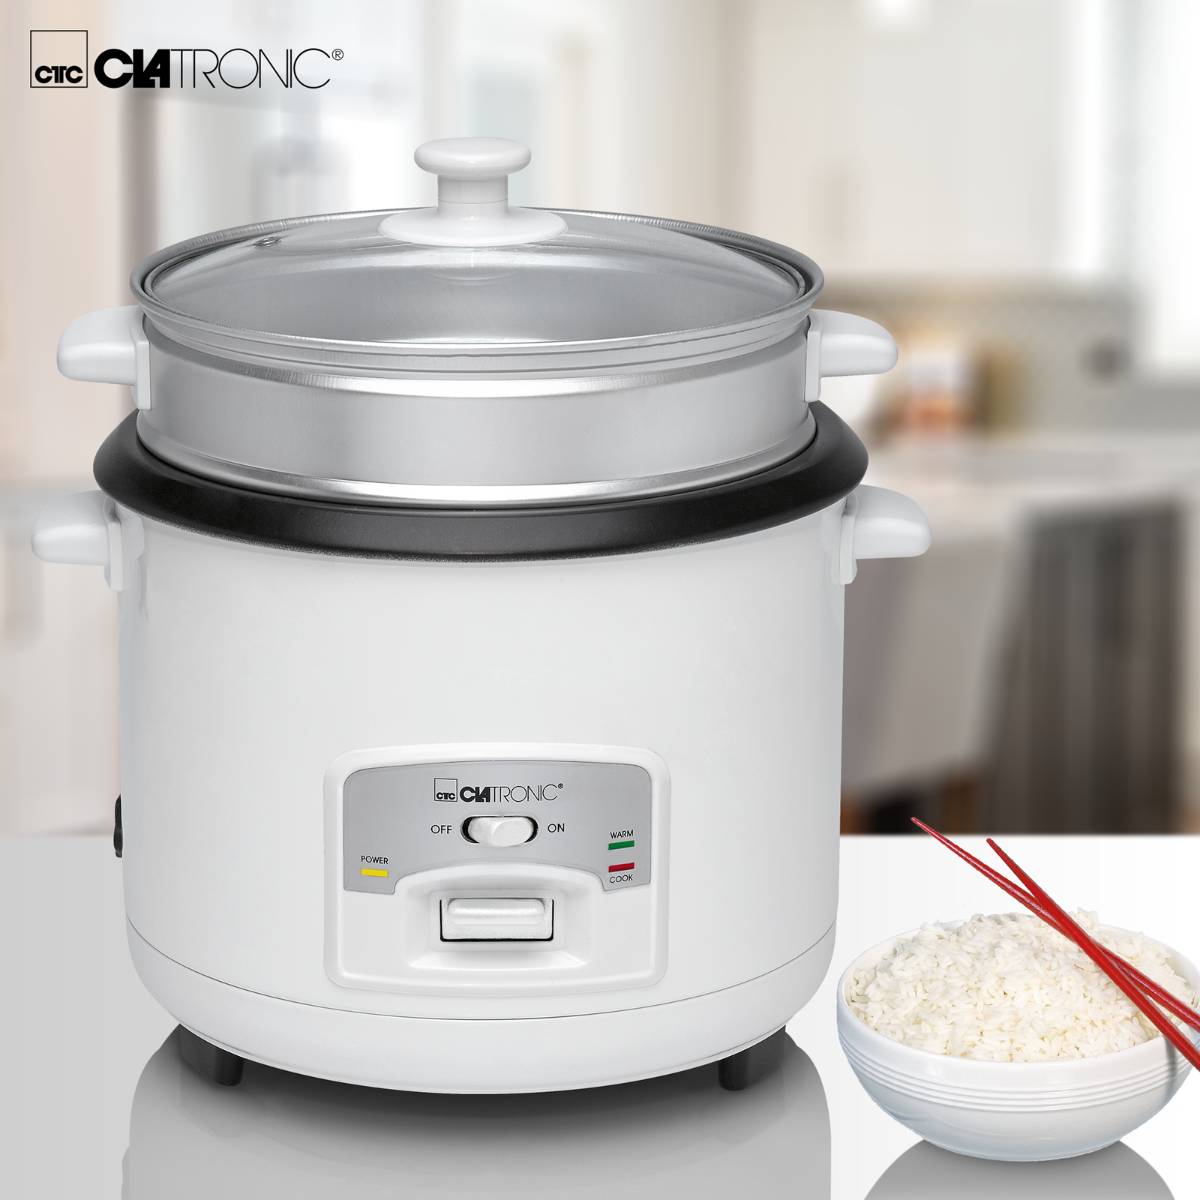 Clatronic RK 3566 Rice cooker White with steam cooker | Conrad.com